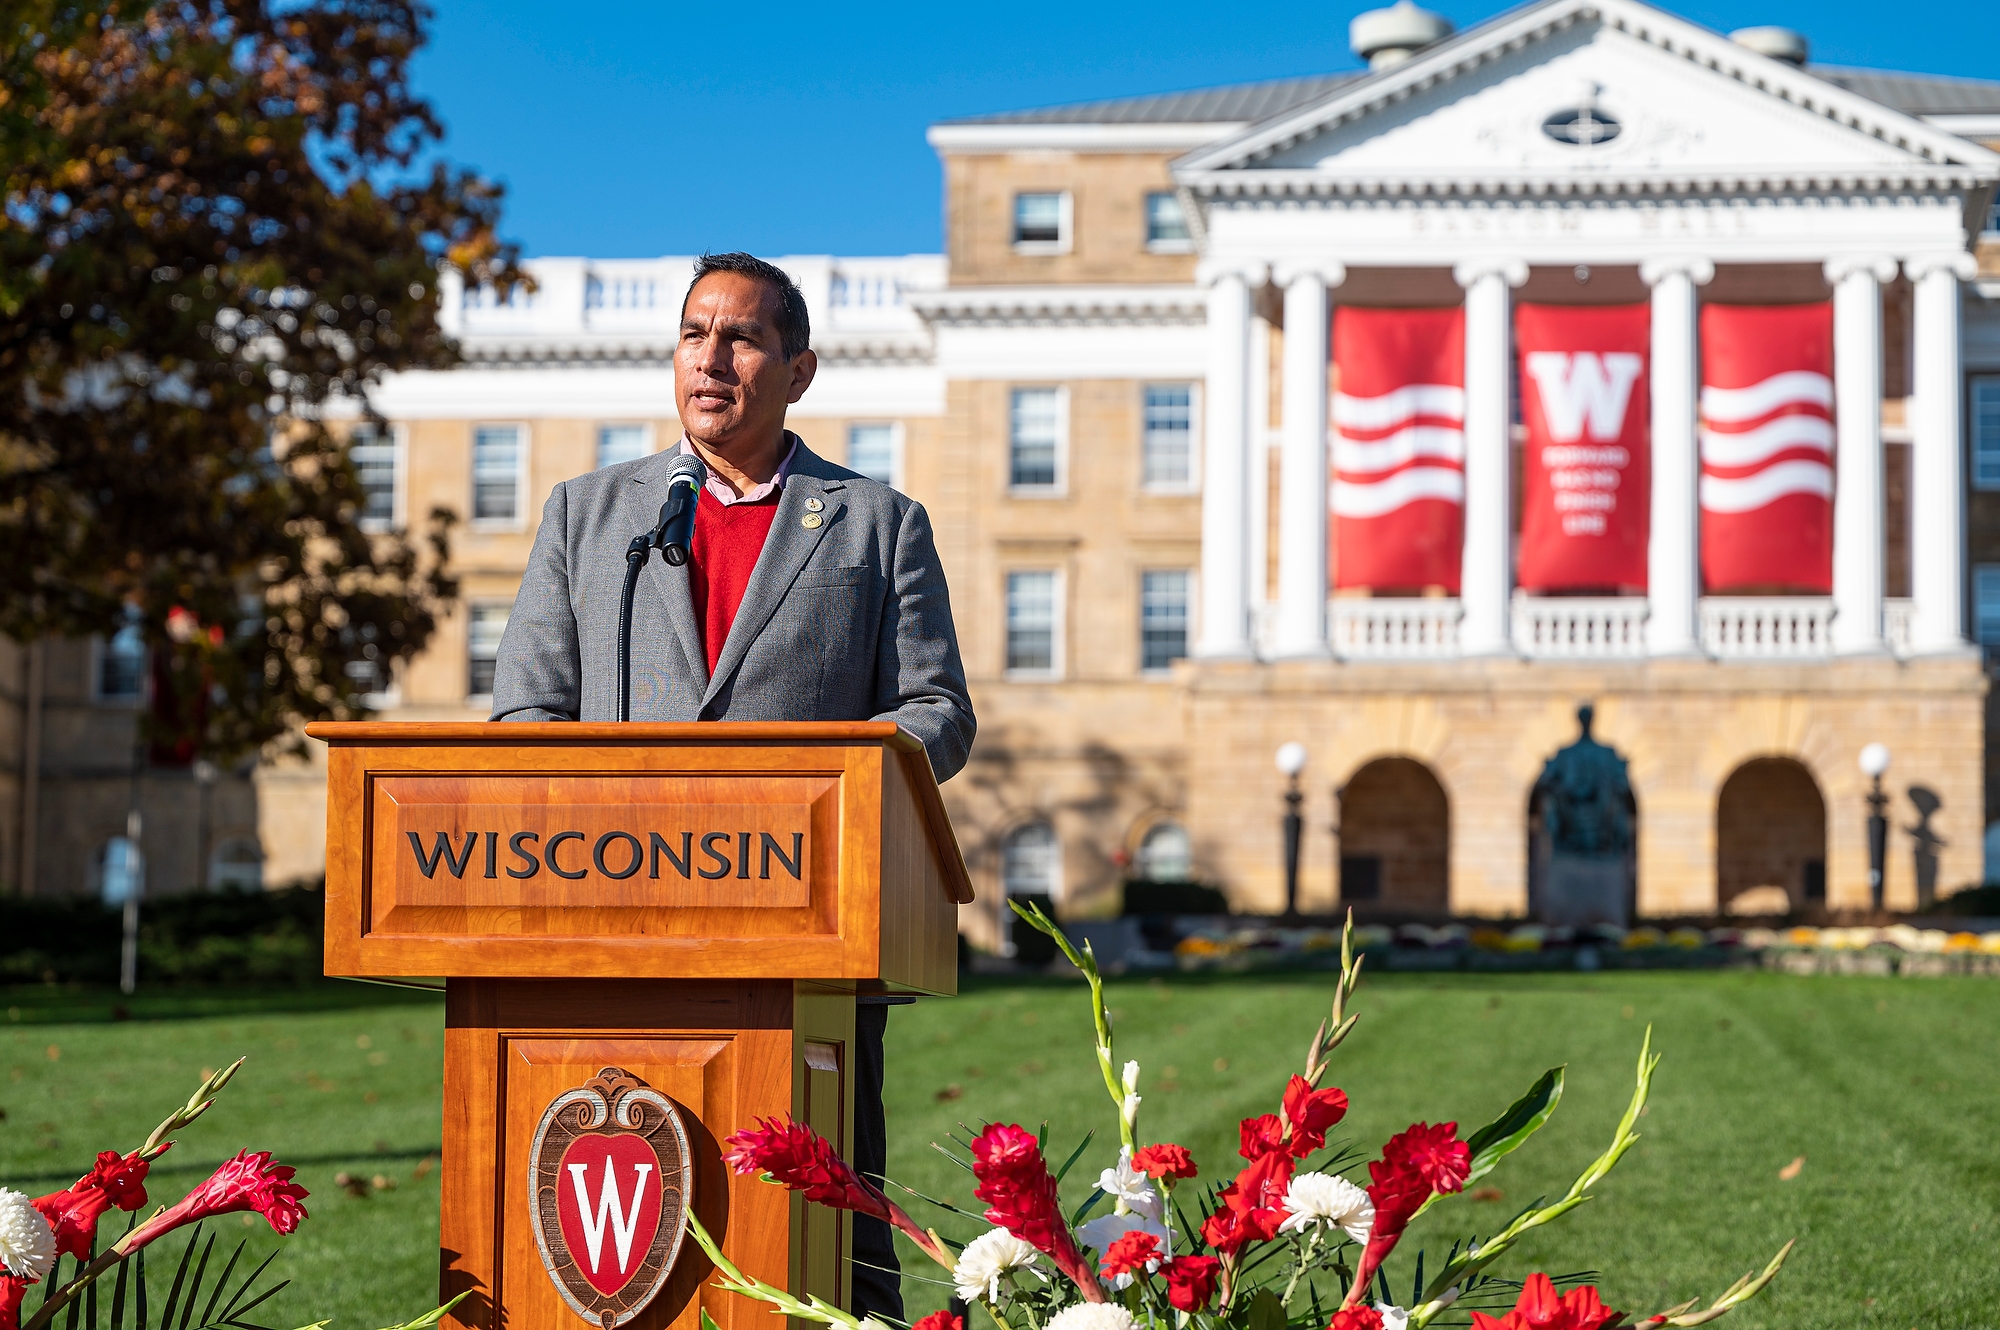 Aaron Bird Bear speaks at a podium in front of Bascom Hall